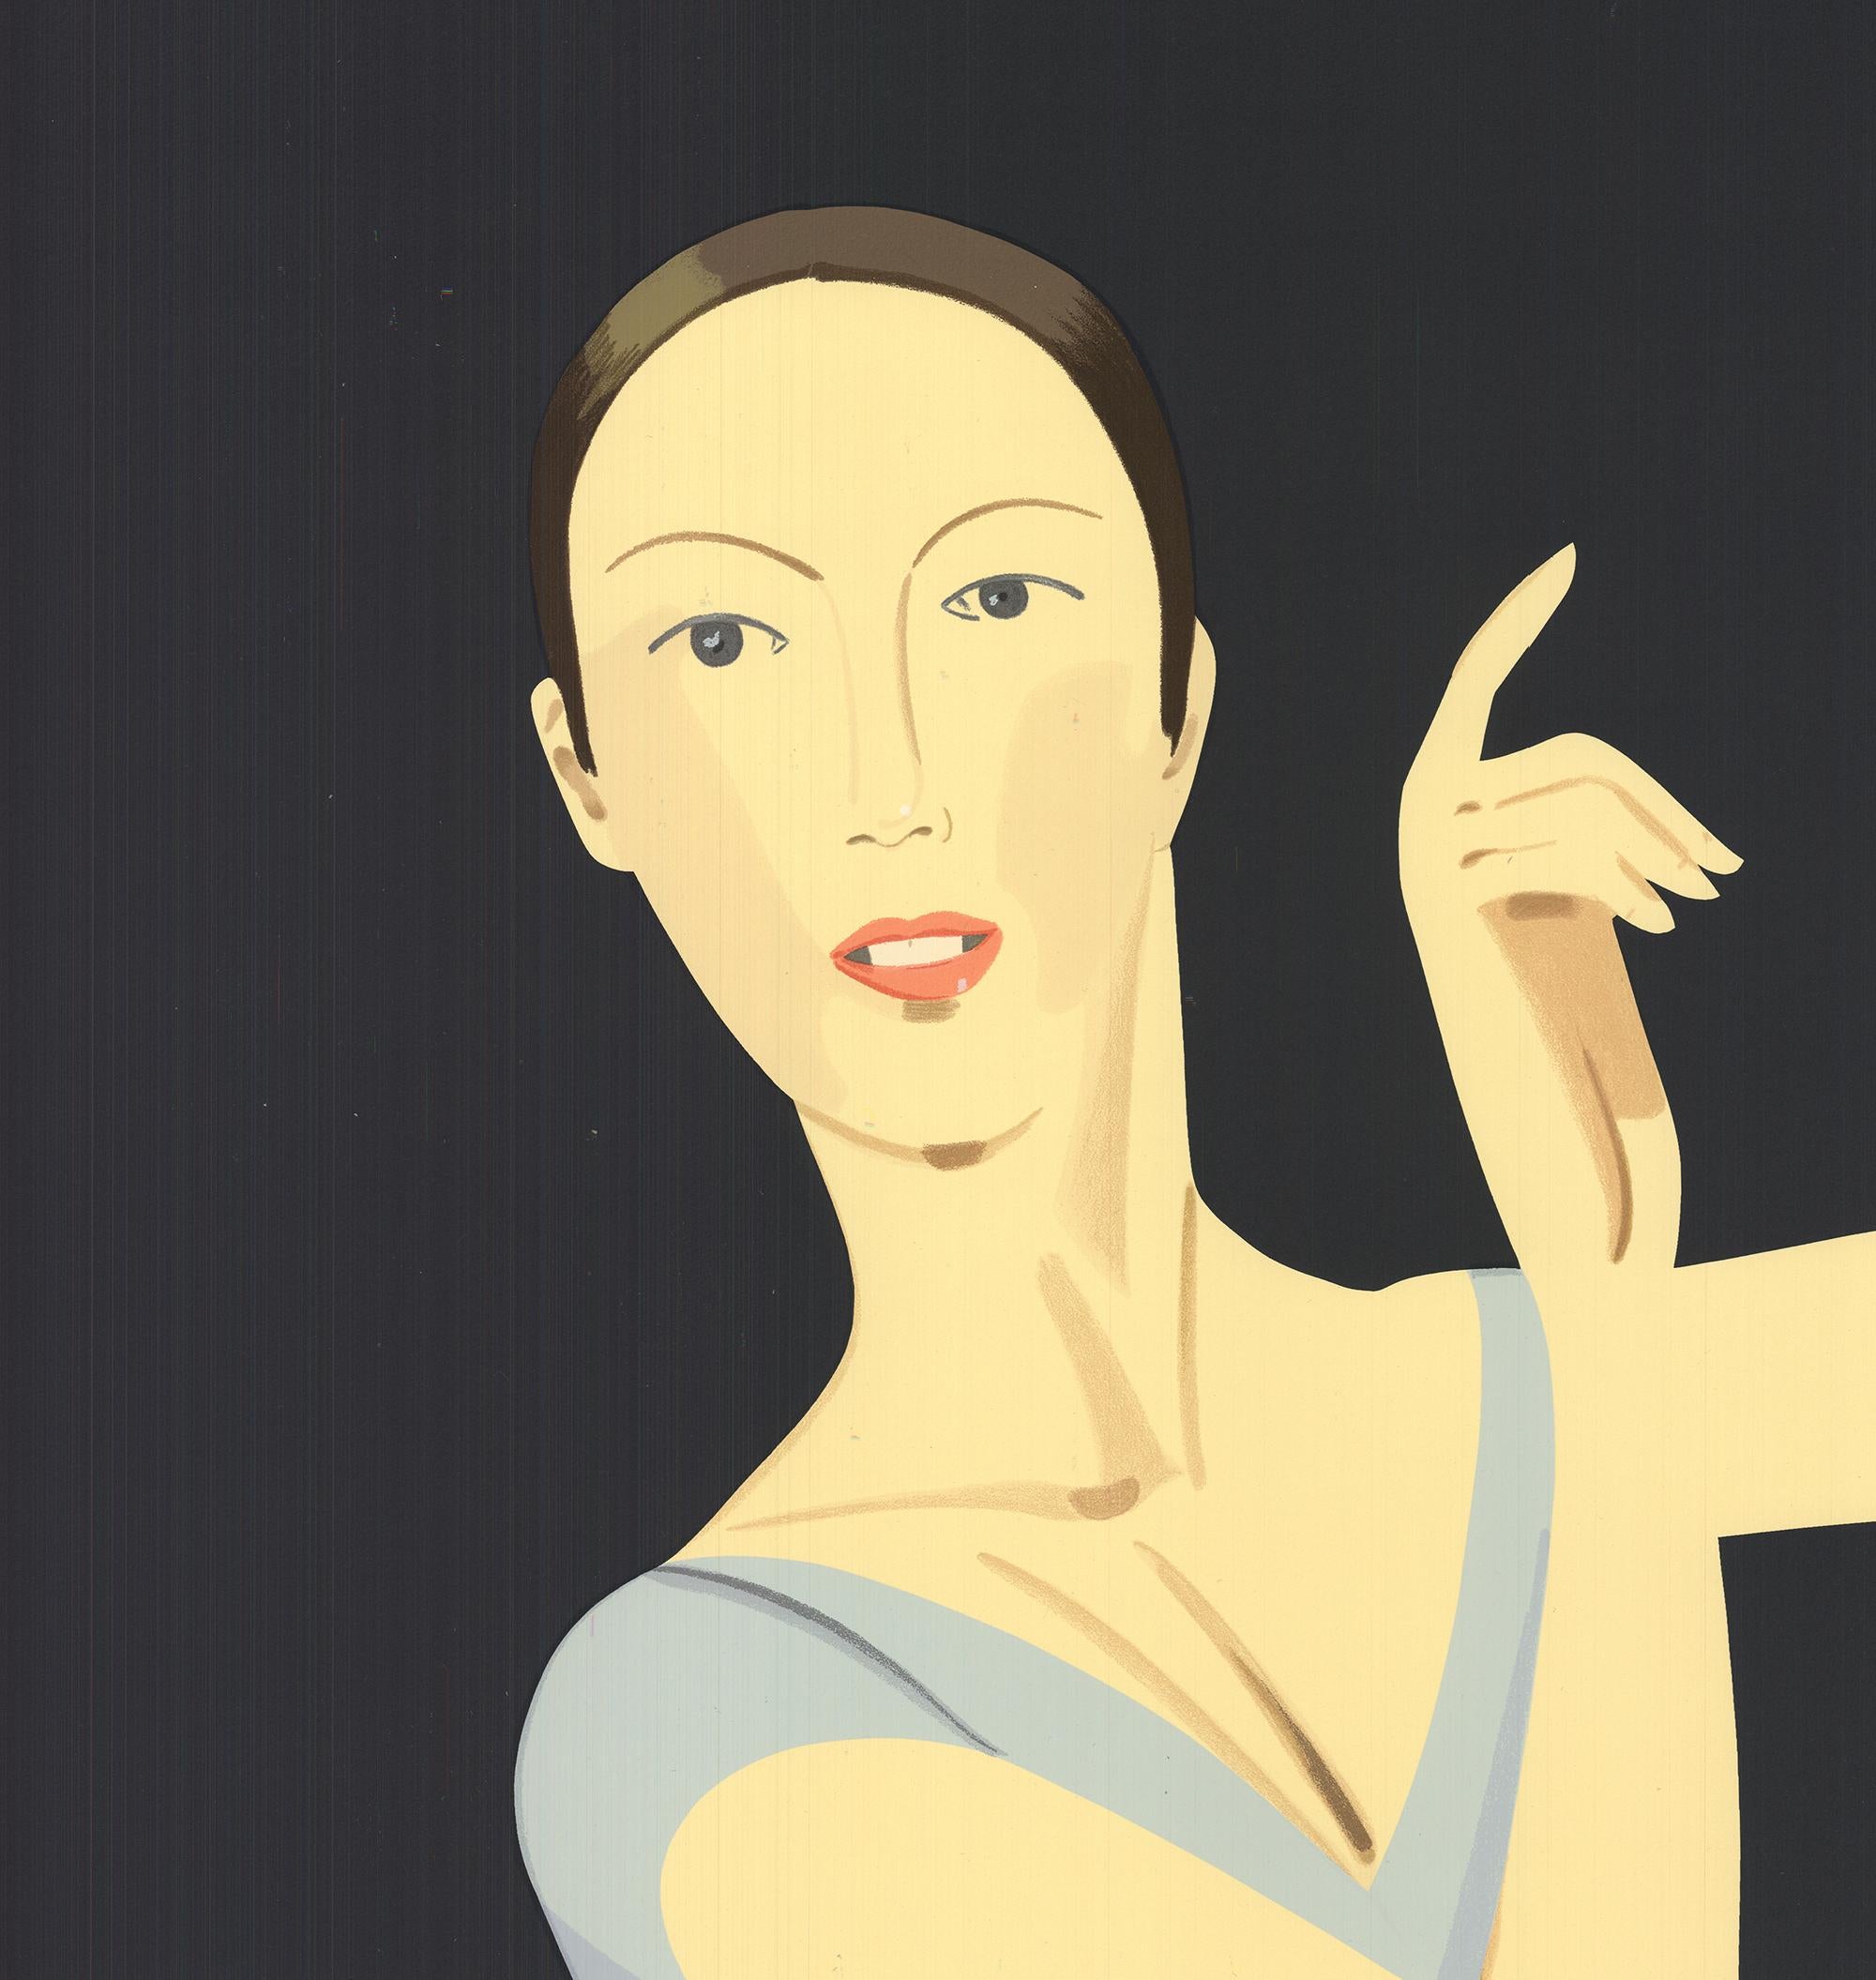 Sku: YY2505-B
Artist: Alex Katz
Title: Sarah-American Dance Festival
Year: 2011
Signed: Yes
Medium: Serigraph
Paper Size: 48 x 34.25 inches ( 121.92 x 86.995 cm )
Image Size: 48 x 34.25 inches ( 121.92 x 86.995 cm )
Edition Size: 100
Framed: